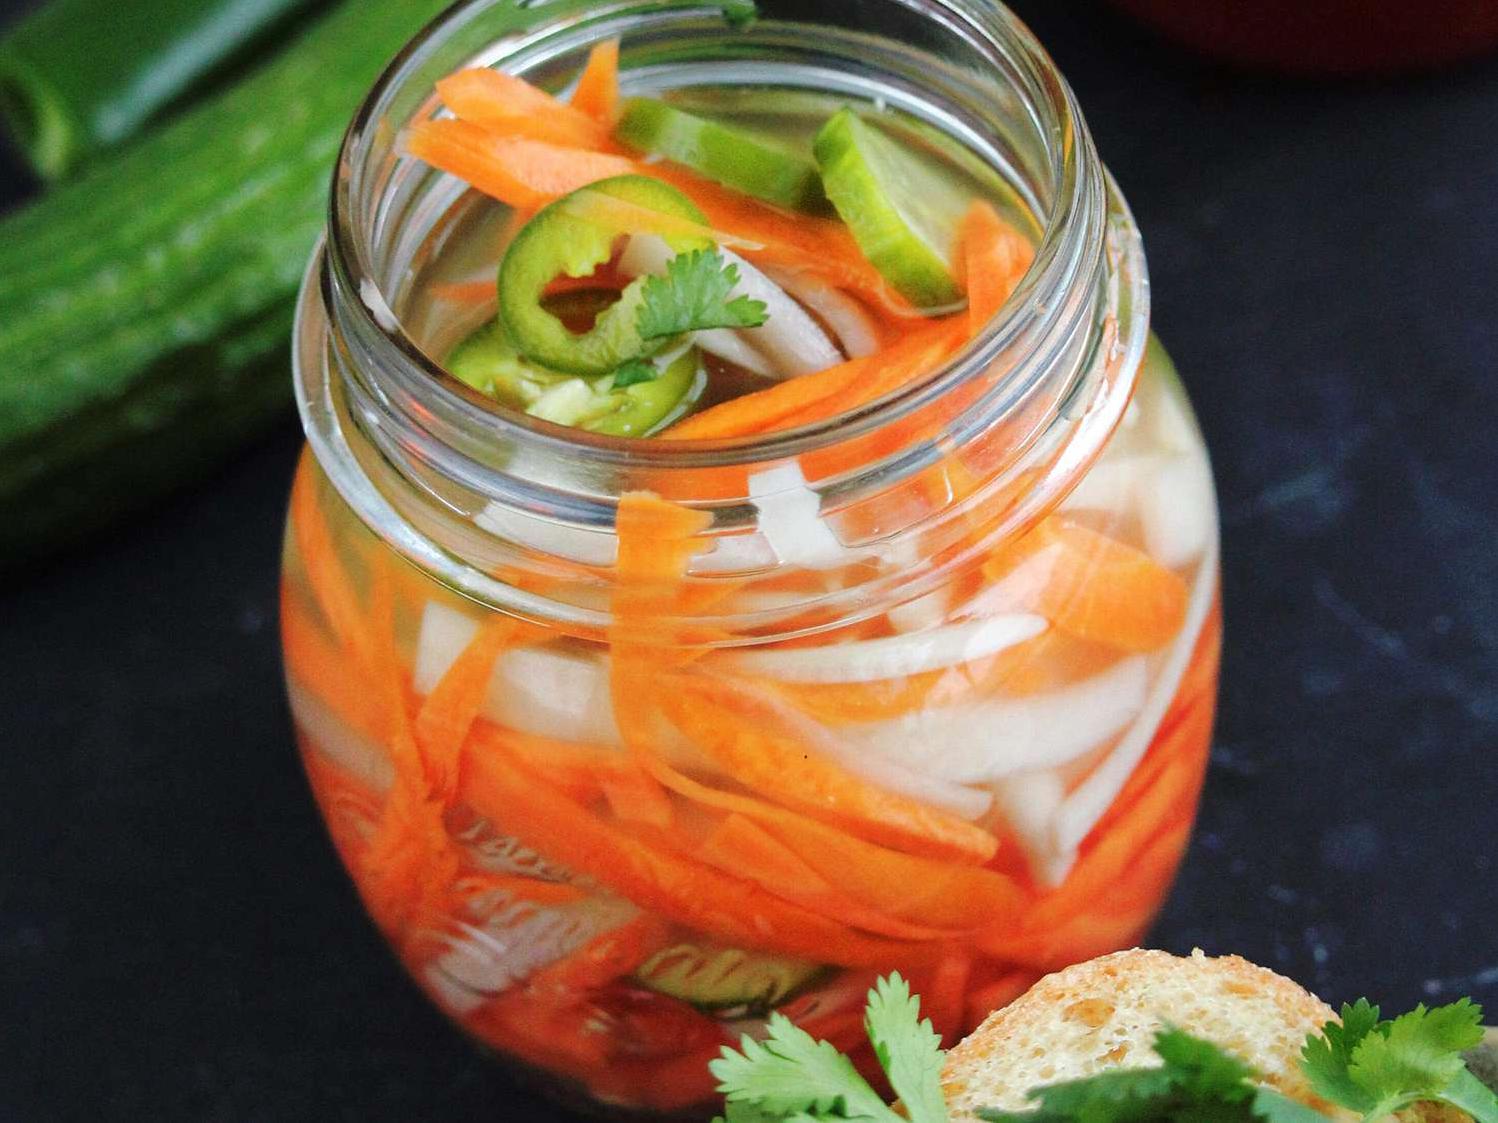  A zesty solution to keep things fresh and healthy.